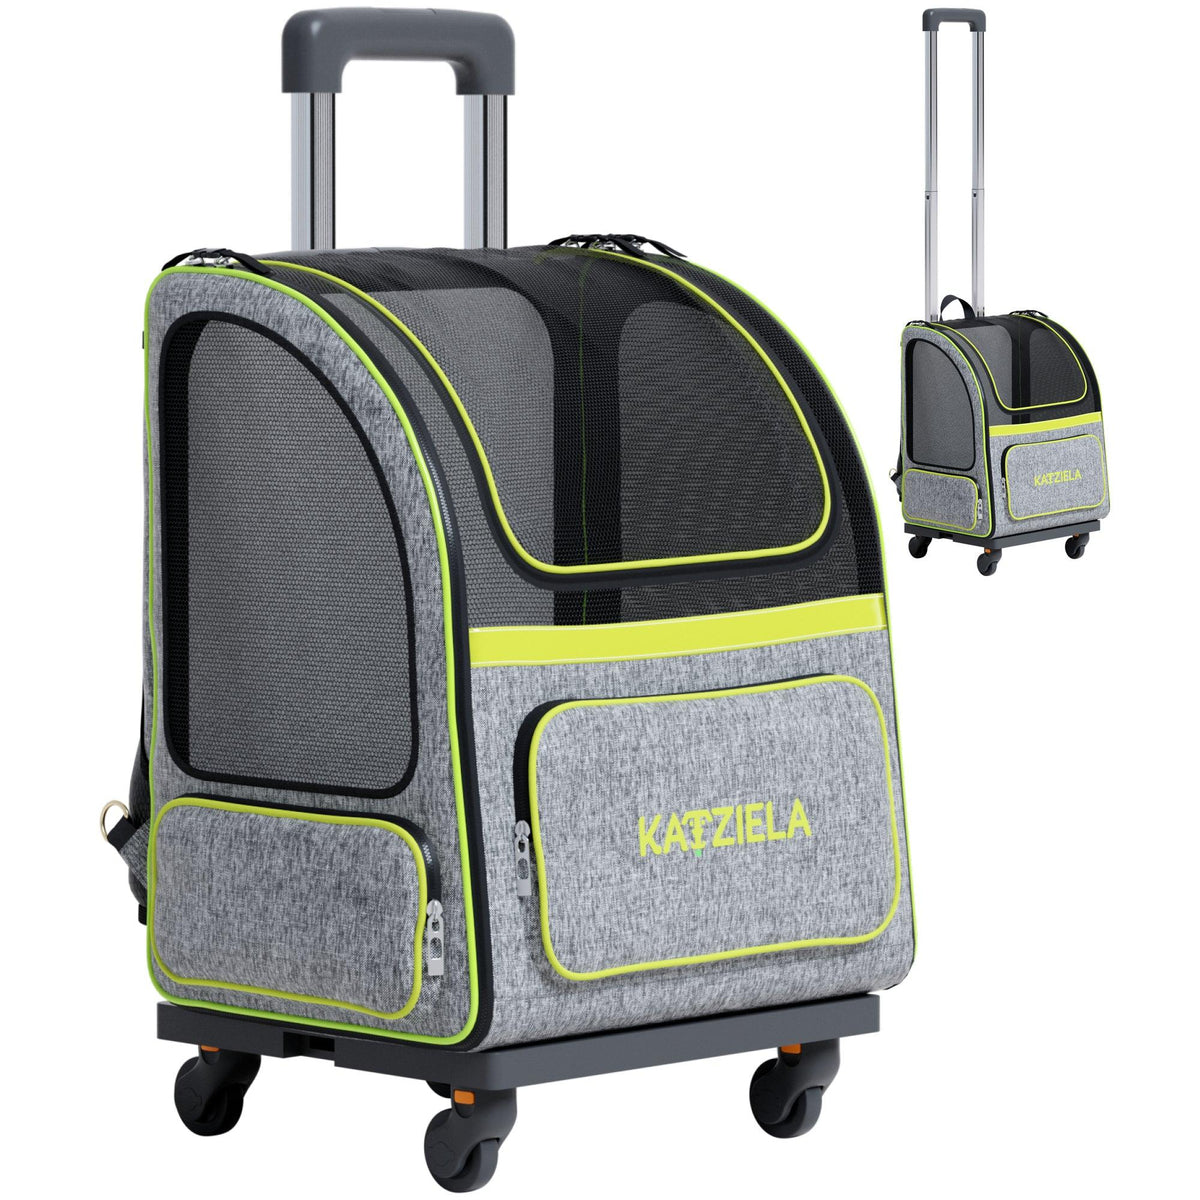 New luggage Removable wheels